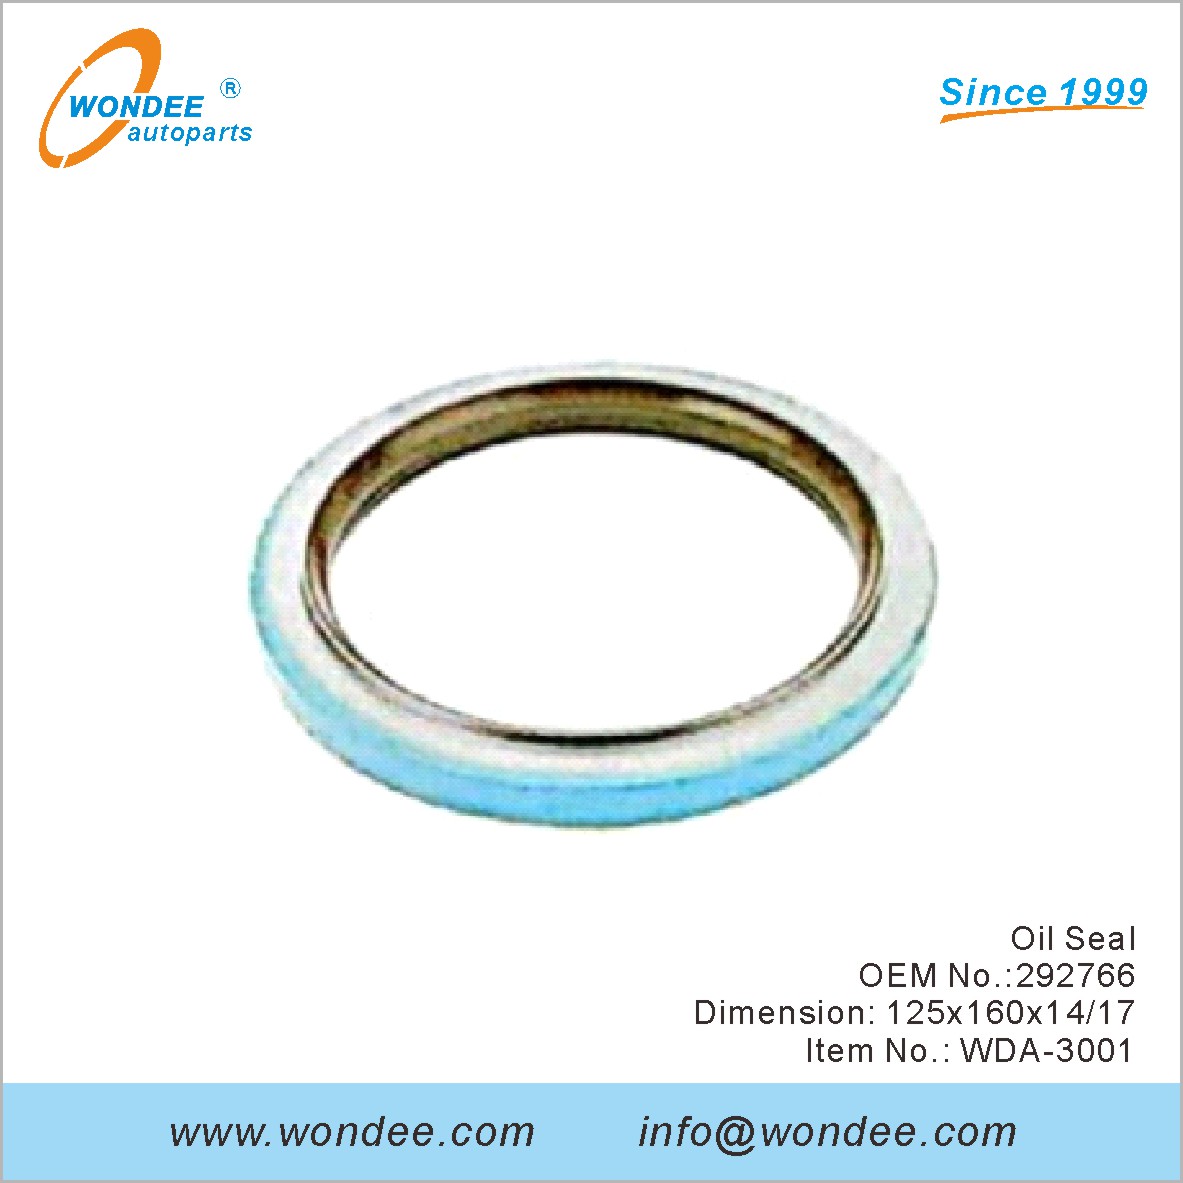 Oil Seal OEM 29276 for DAF from WONDEE